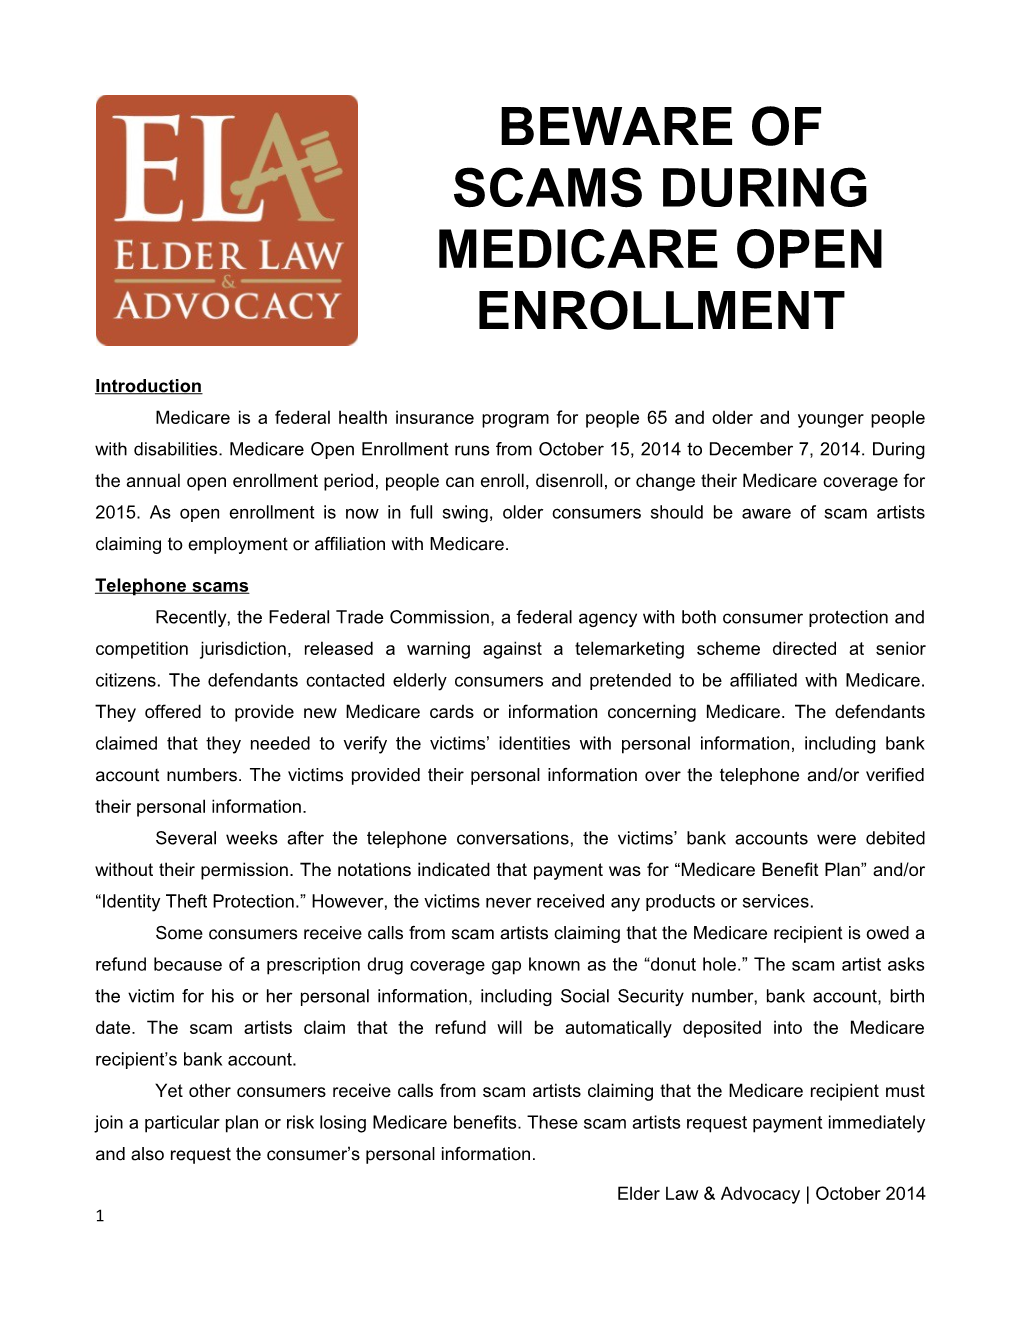 Beware of Scams During Medicare Open Enrollment